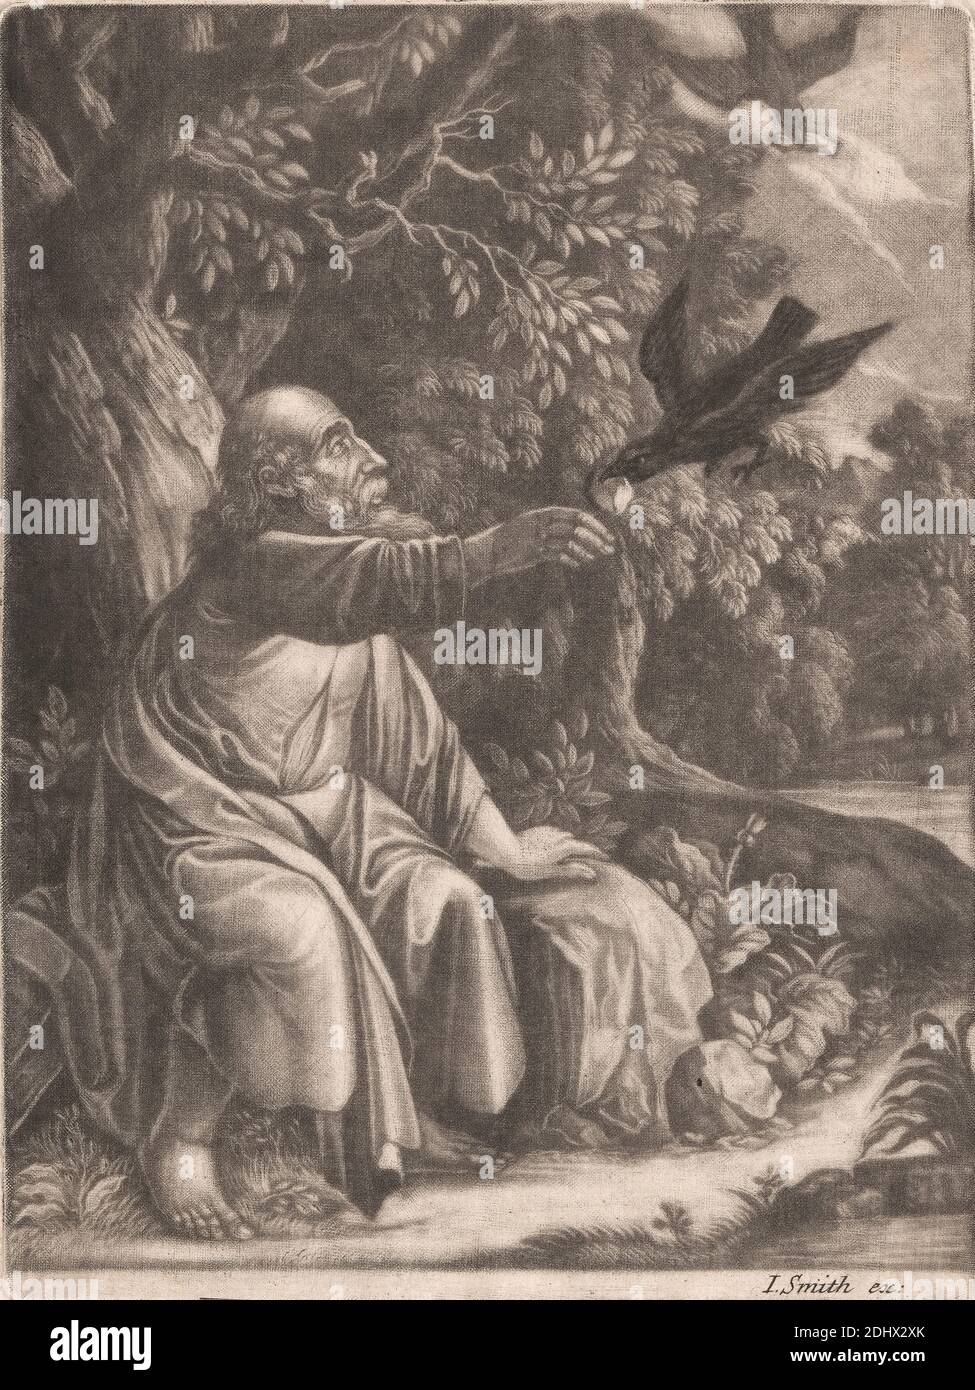 Elijah, Print made by Robert Robinson, active 1674–1706, British, after Pieter Nolpe, 1613/4–1652/3, Dutch, Published by John Smith, 1652–1743, British, undated, Mezzotint on medium, slightly textured, blued white, laid paper, Sheet: 7 × 5 5/16 inches (17.8 × 13.5 cm) and Image: 6 13/16 × 5 3/16 inches (17.3 × 13.2 cm), barefoot, beard, blessing, bread, brook, Christianity, elderly, faith, feeding, flesh, Judaism, love, Old Testament, prophet, protection, ravens, reaching, religious and mythological subject, sitting, trees, wilderness Stock Photo